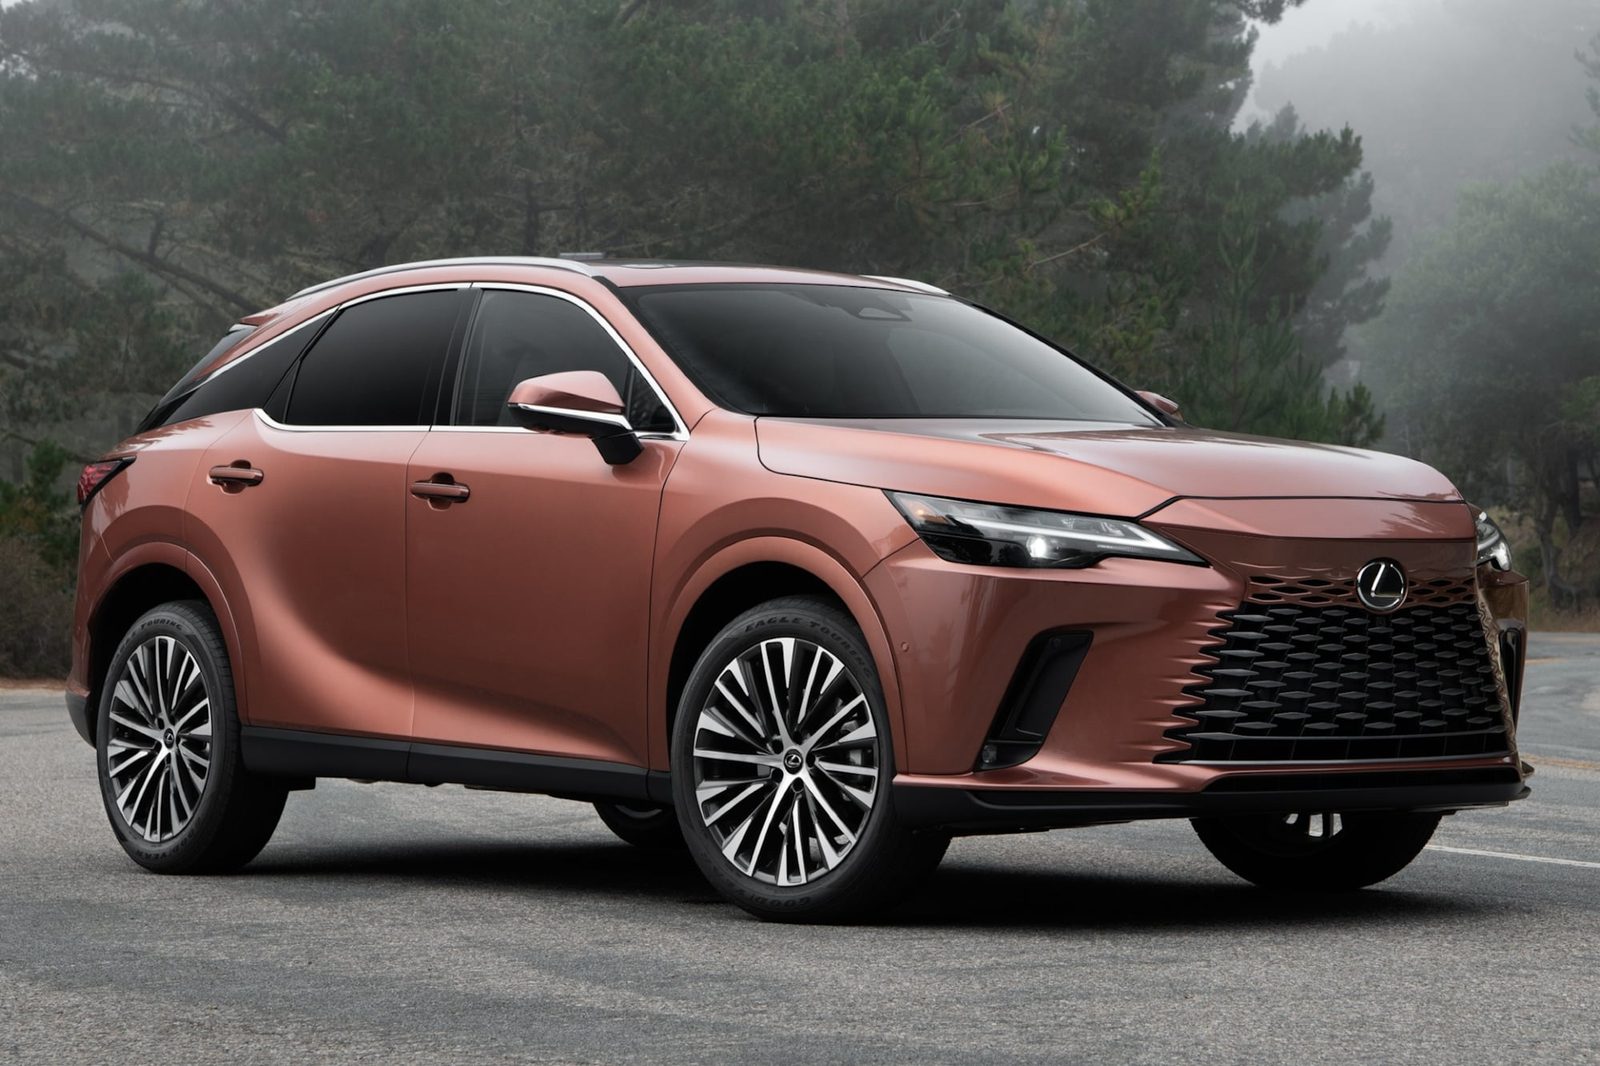 industry news, lexus and toyota achieve something at dealer level other brands don't